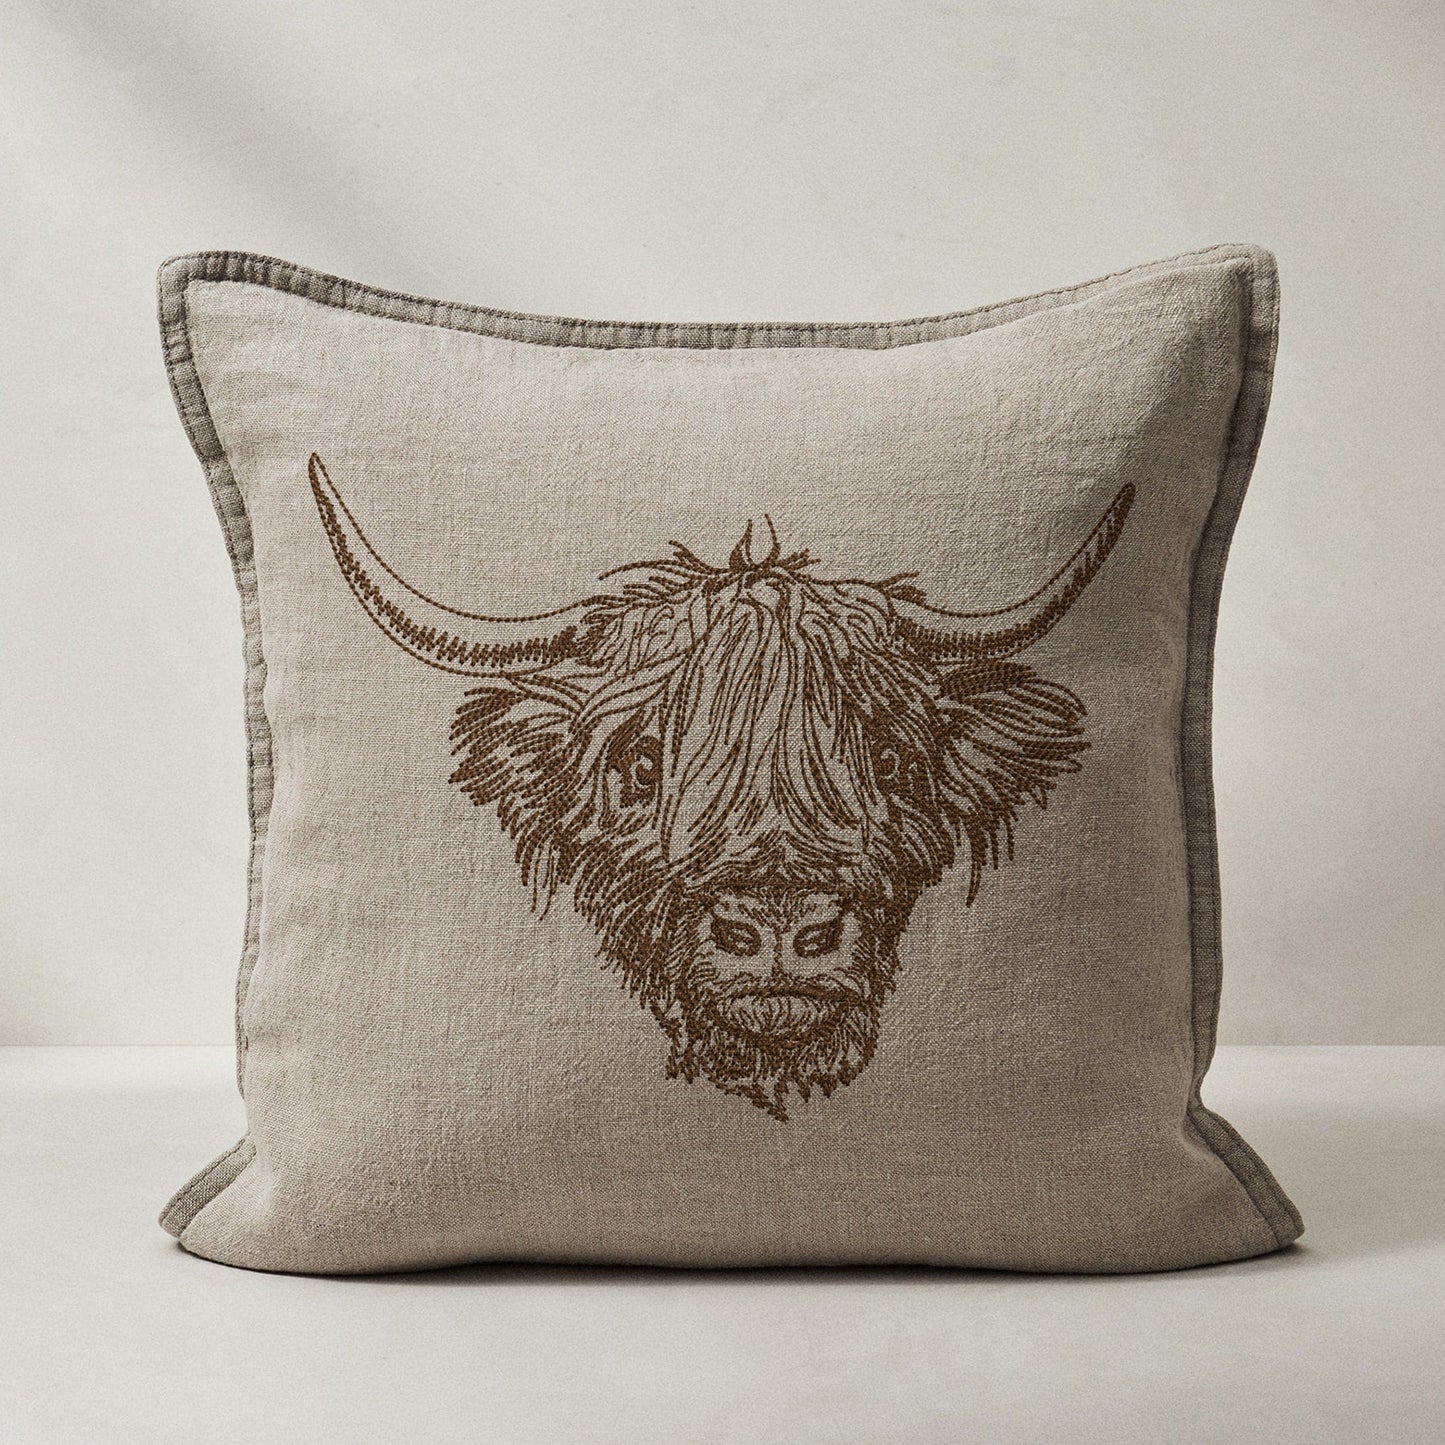 Scottish Cow Machine Embroidery Design on pillow